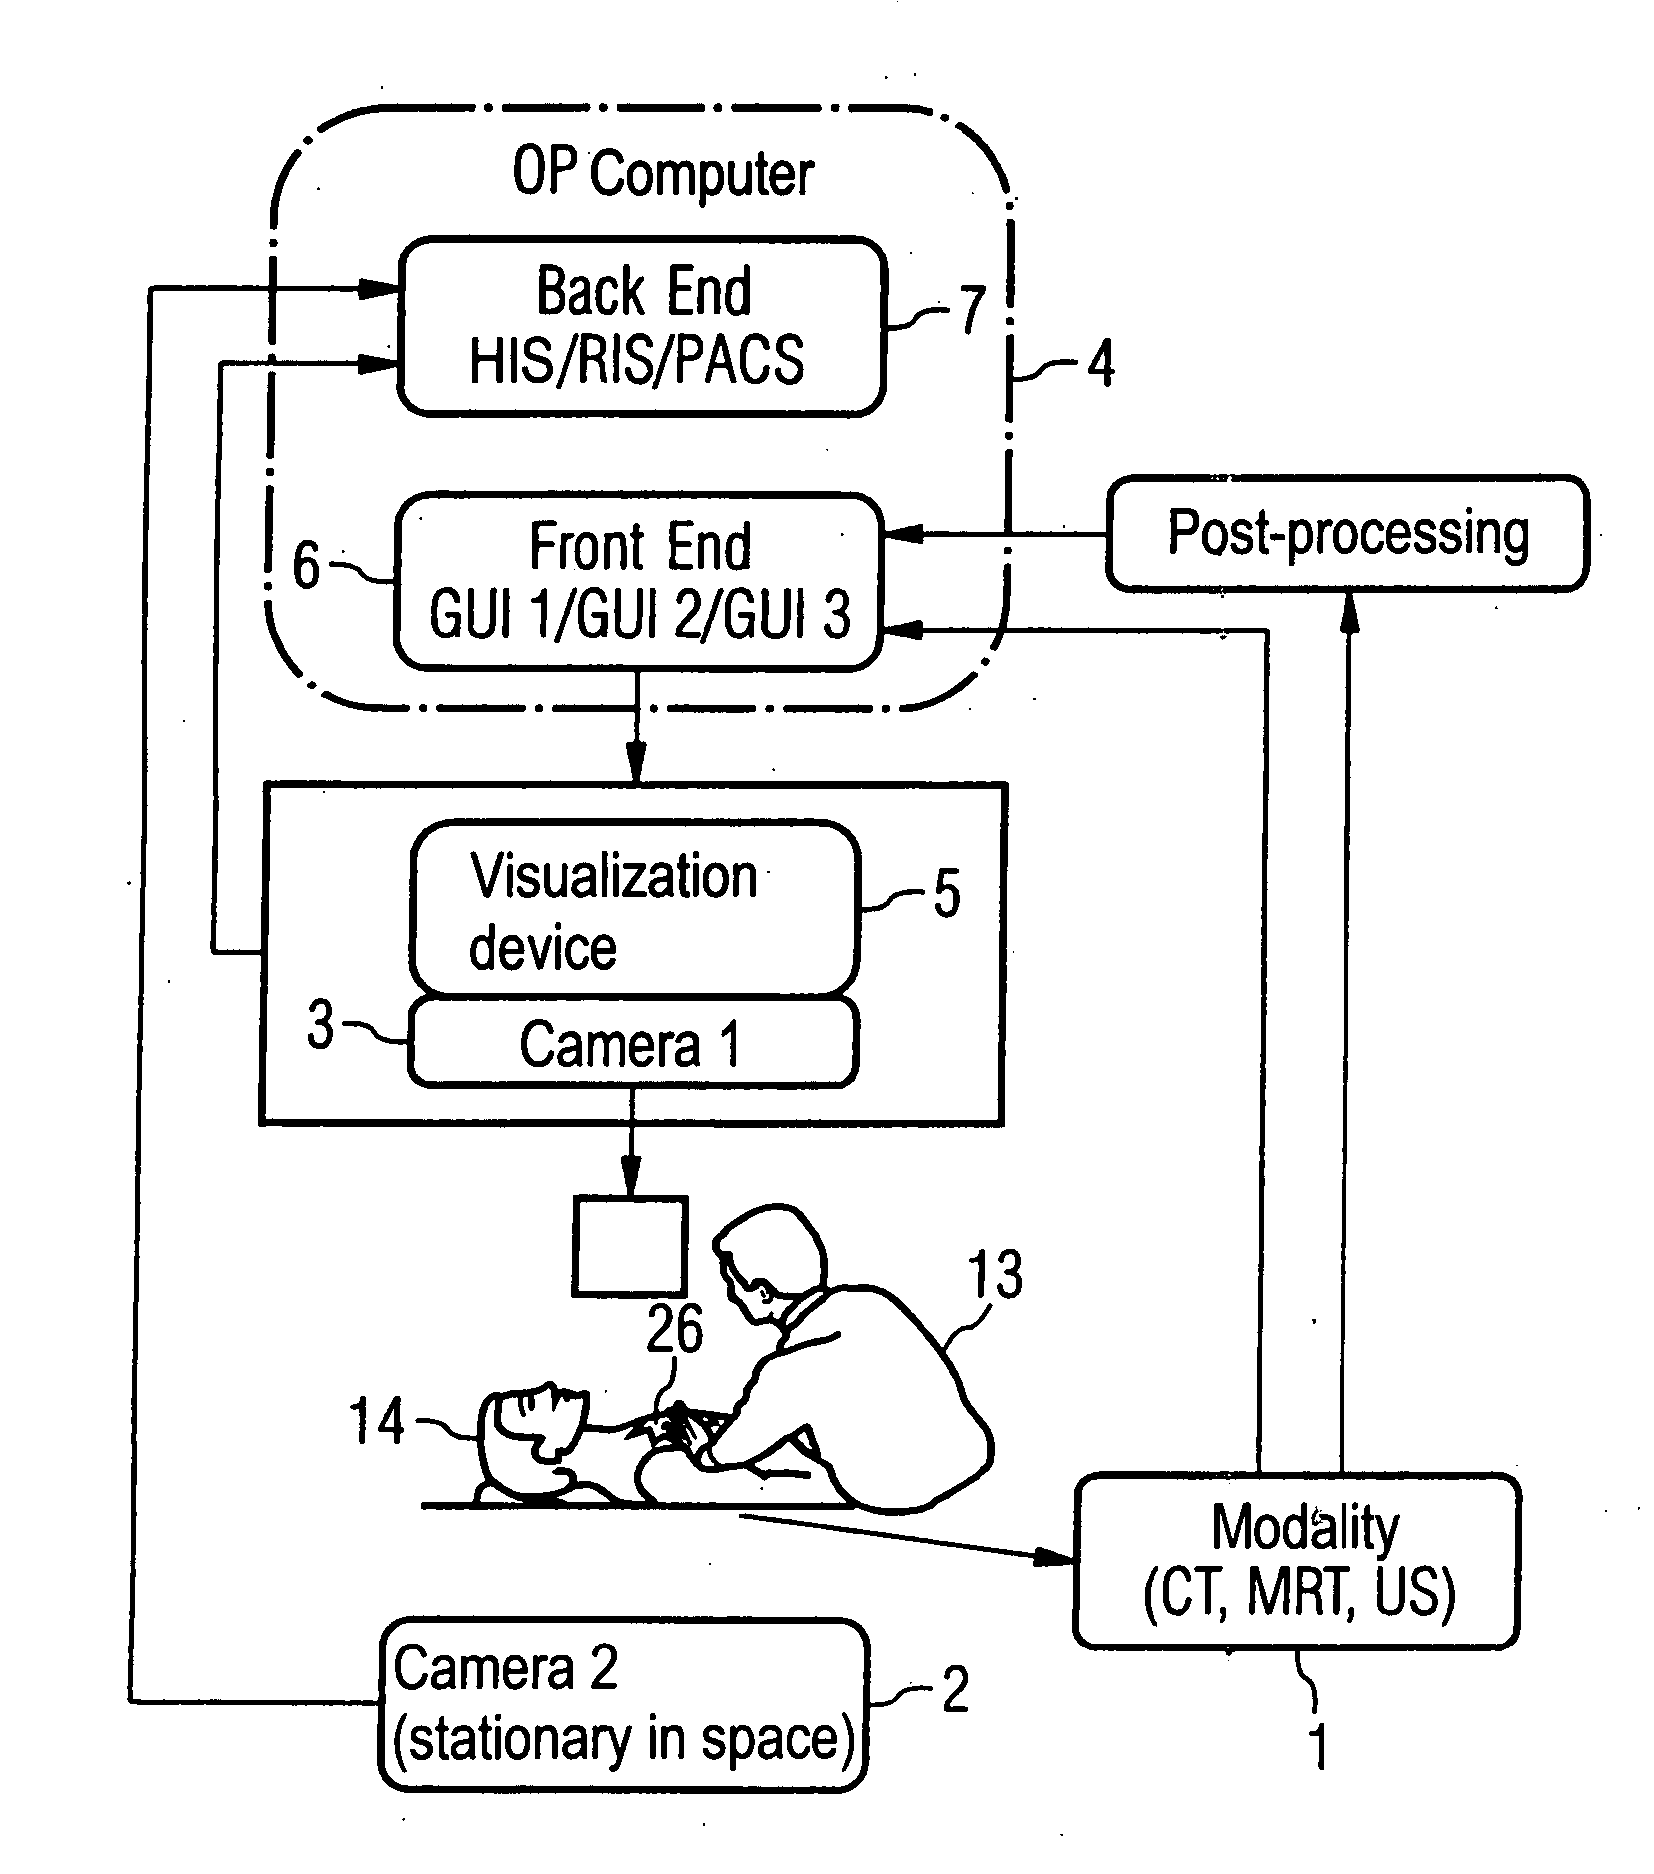 System for providing situation-dependent, real-time visual support to a surgeon, with associated documentation and archiving of visual representations